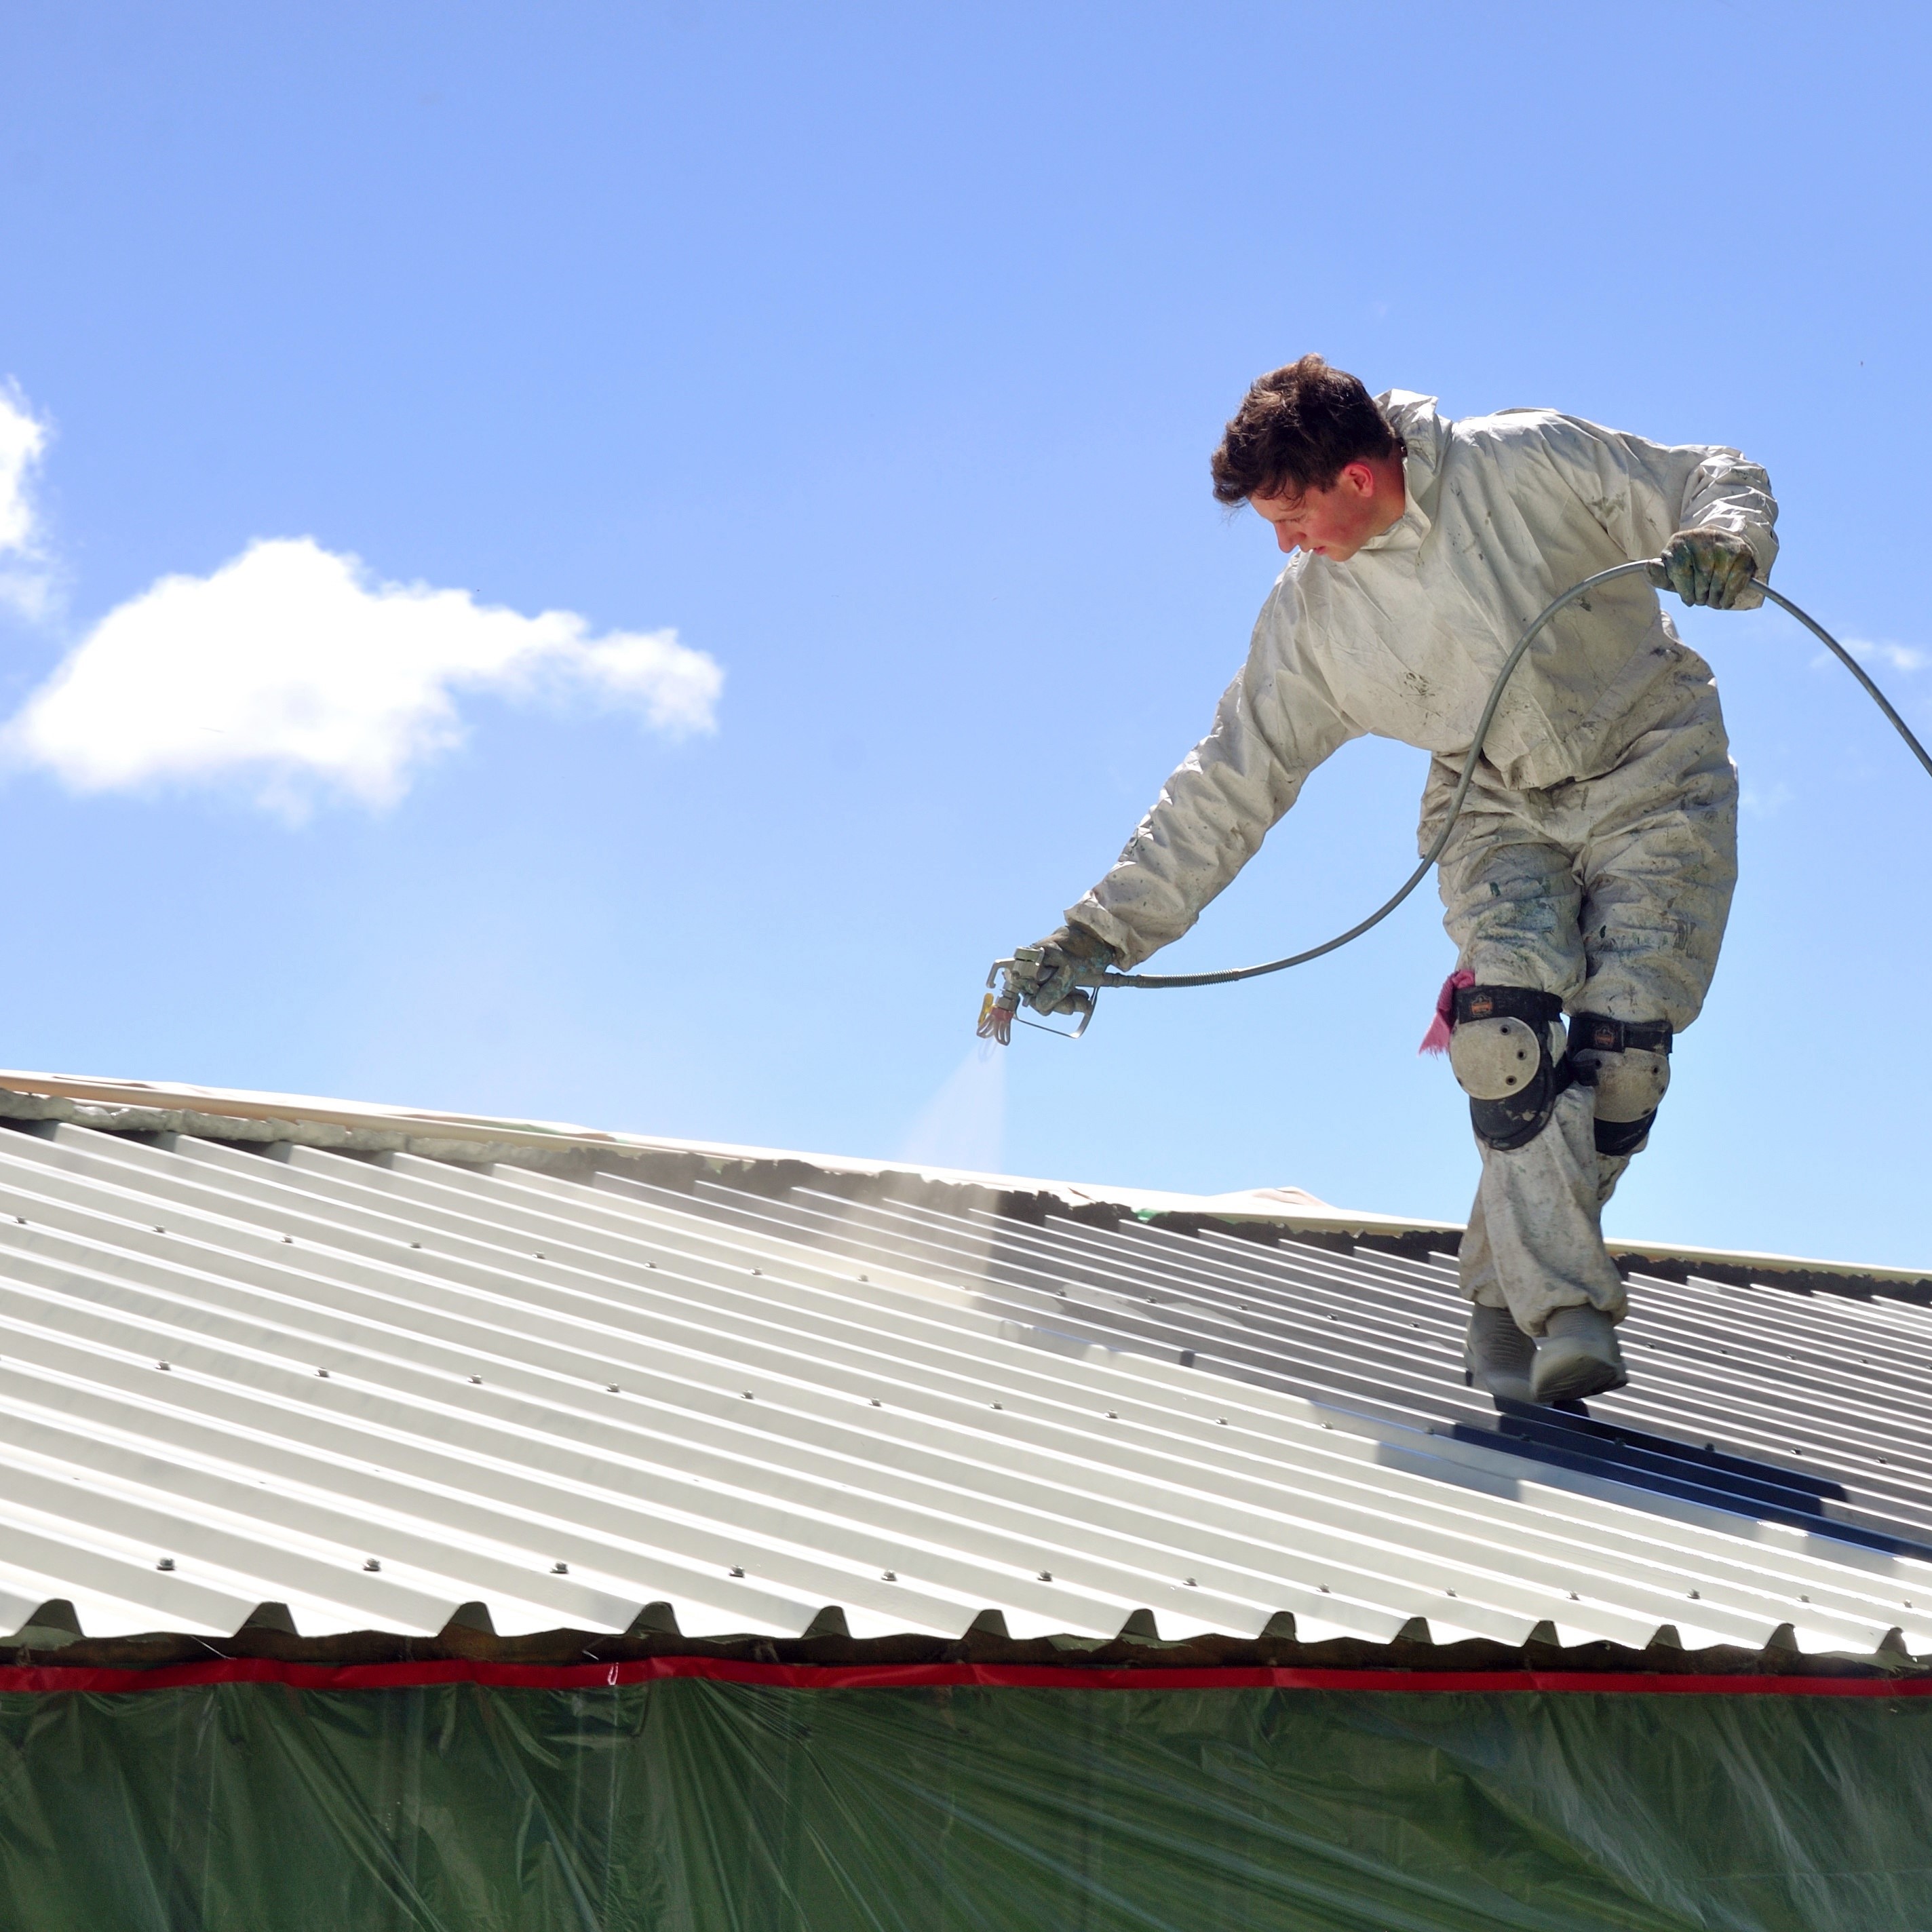 Spraying silicone coating on a roof.